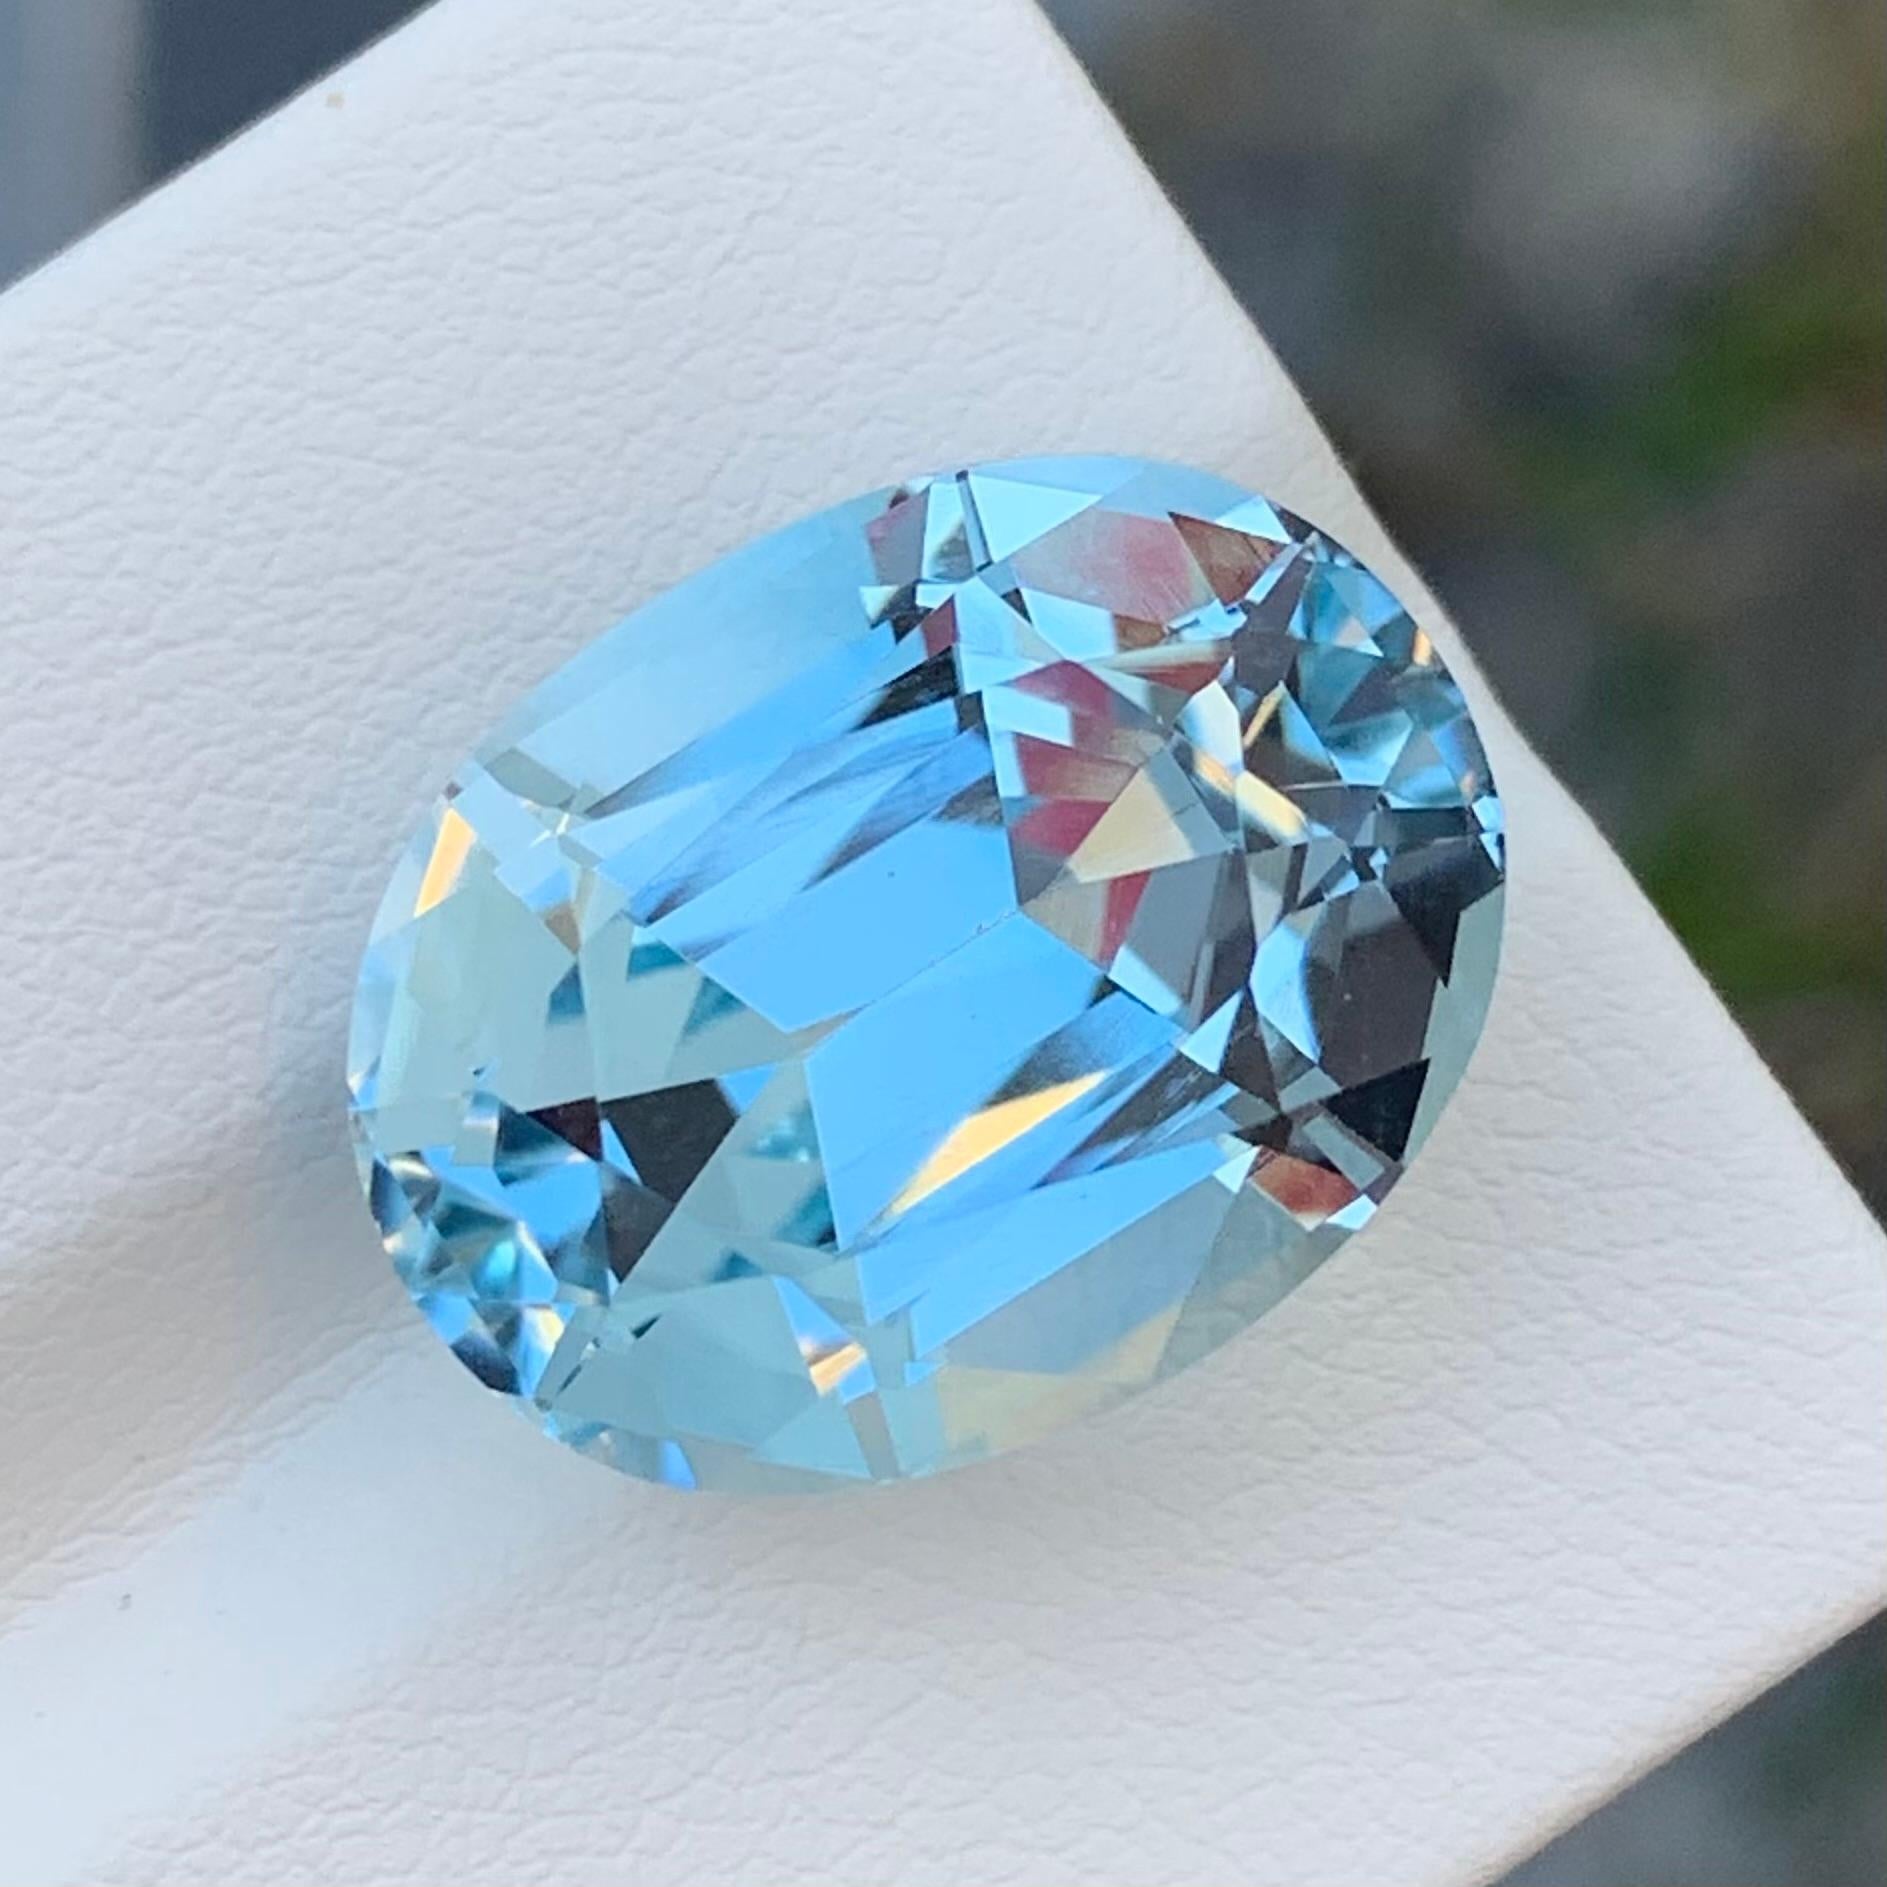 Faceted Light Blue Topaz
Weight: 22.10 Carats
Dimension: 18.2 x 14.1 x 11 Mm
Origin: Brazil
Color: Light Blue
Shape: Oval 
Certificate: On Demand
.
Blue topaz is a mesmerizing gemstone that showcases a captivating blue hue reminiscent of clear blue